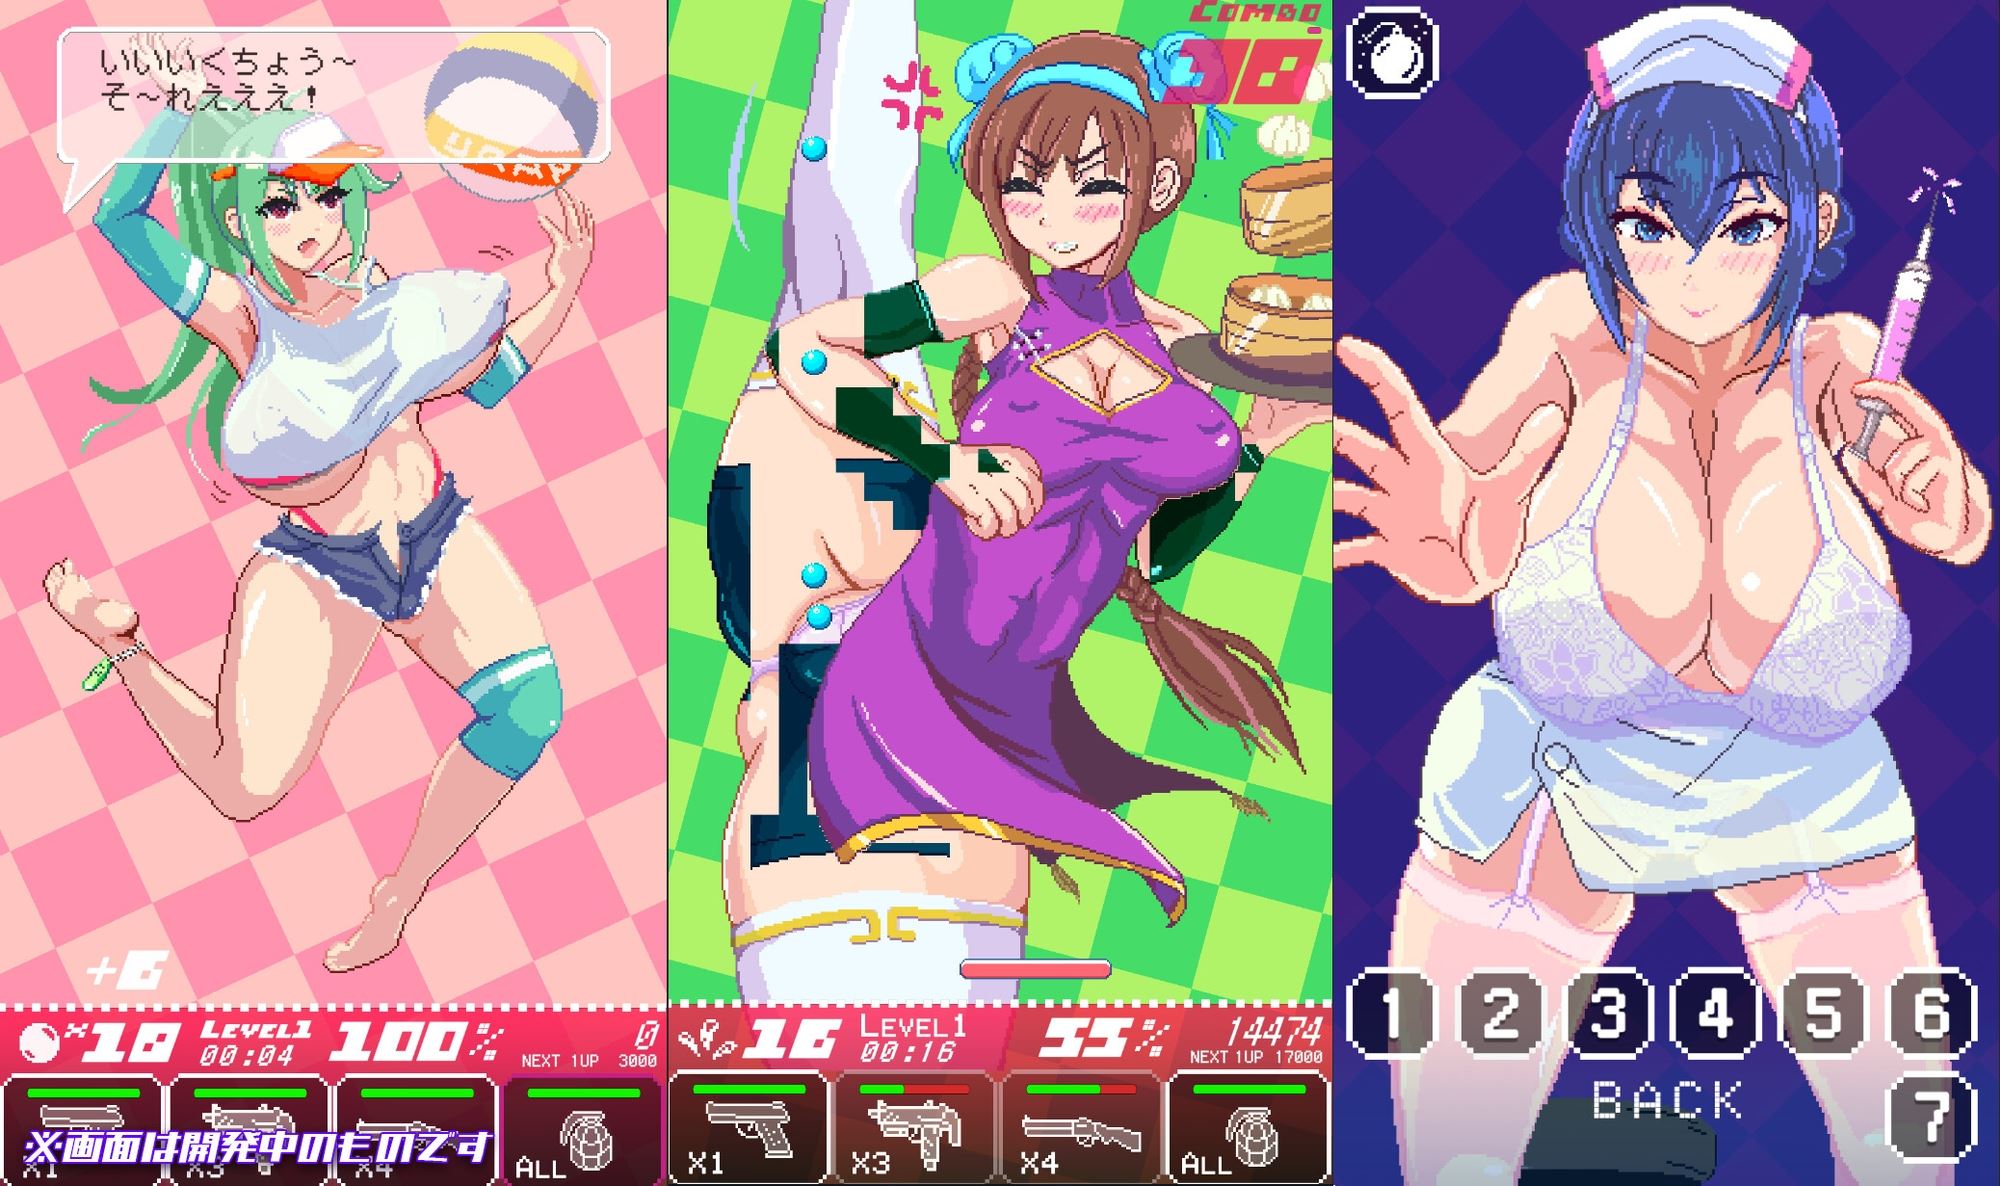 Hentai games android